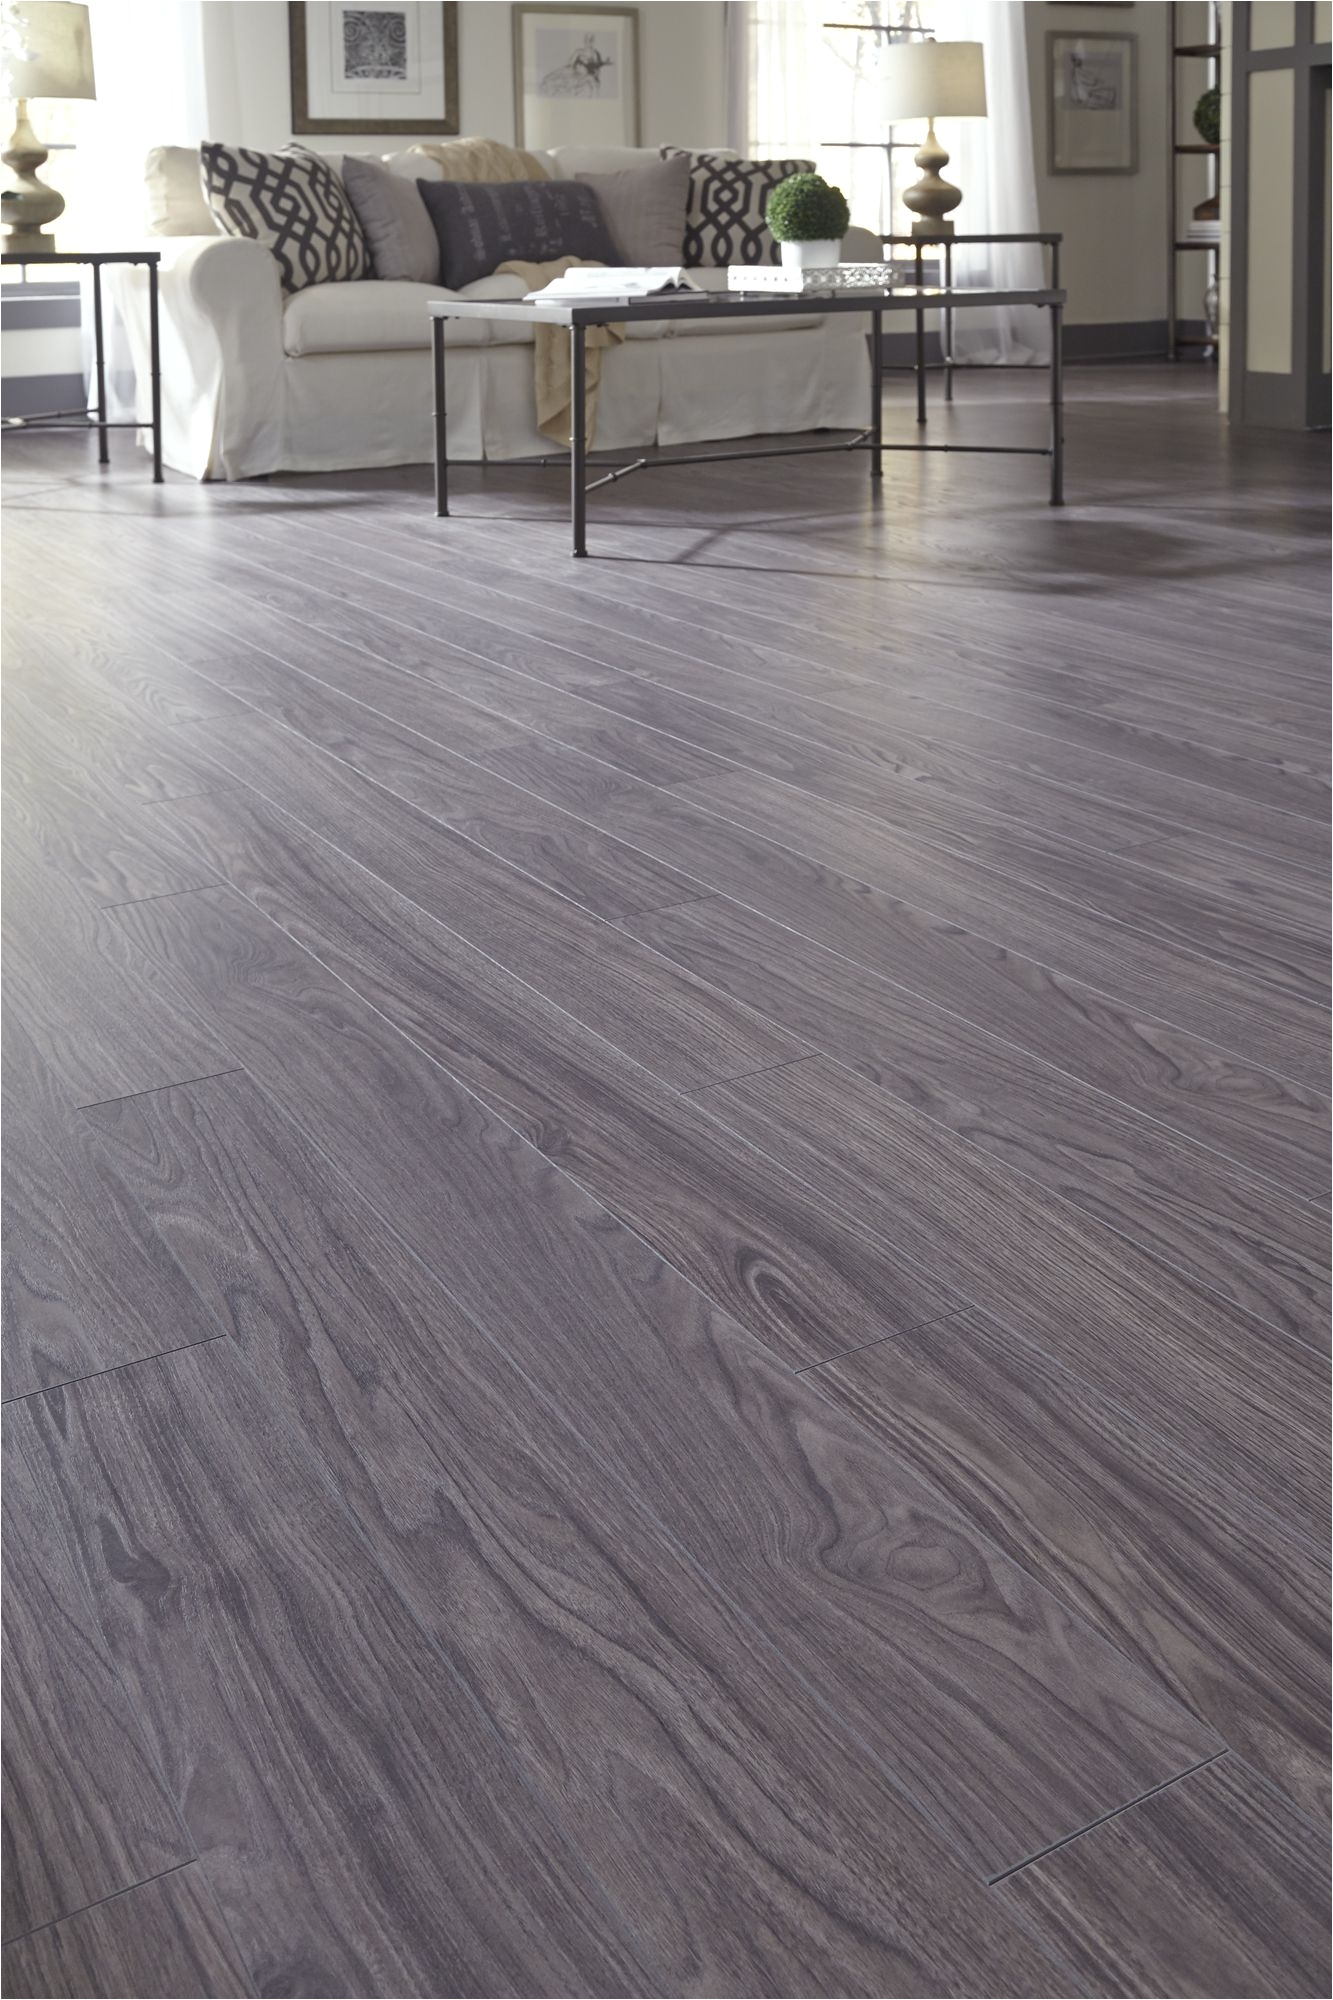 laminate is in budget and is durable and lasts a very long time we use high quality laminate that looks as good as most hardwood